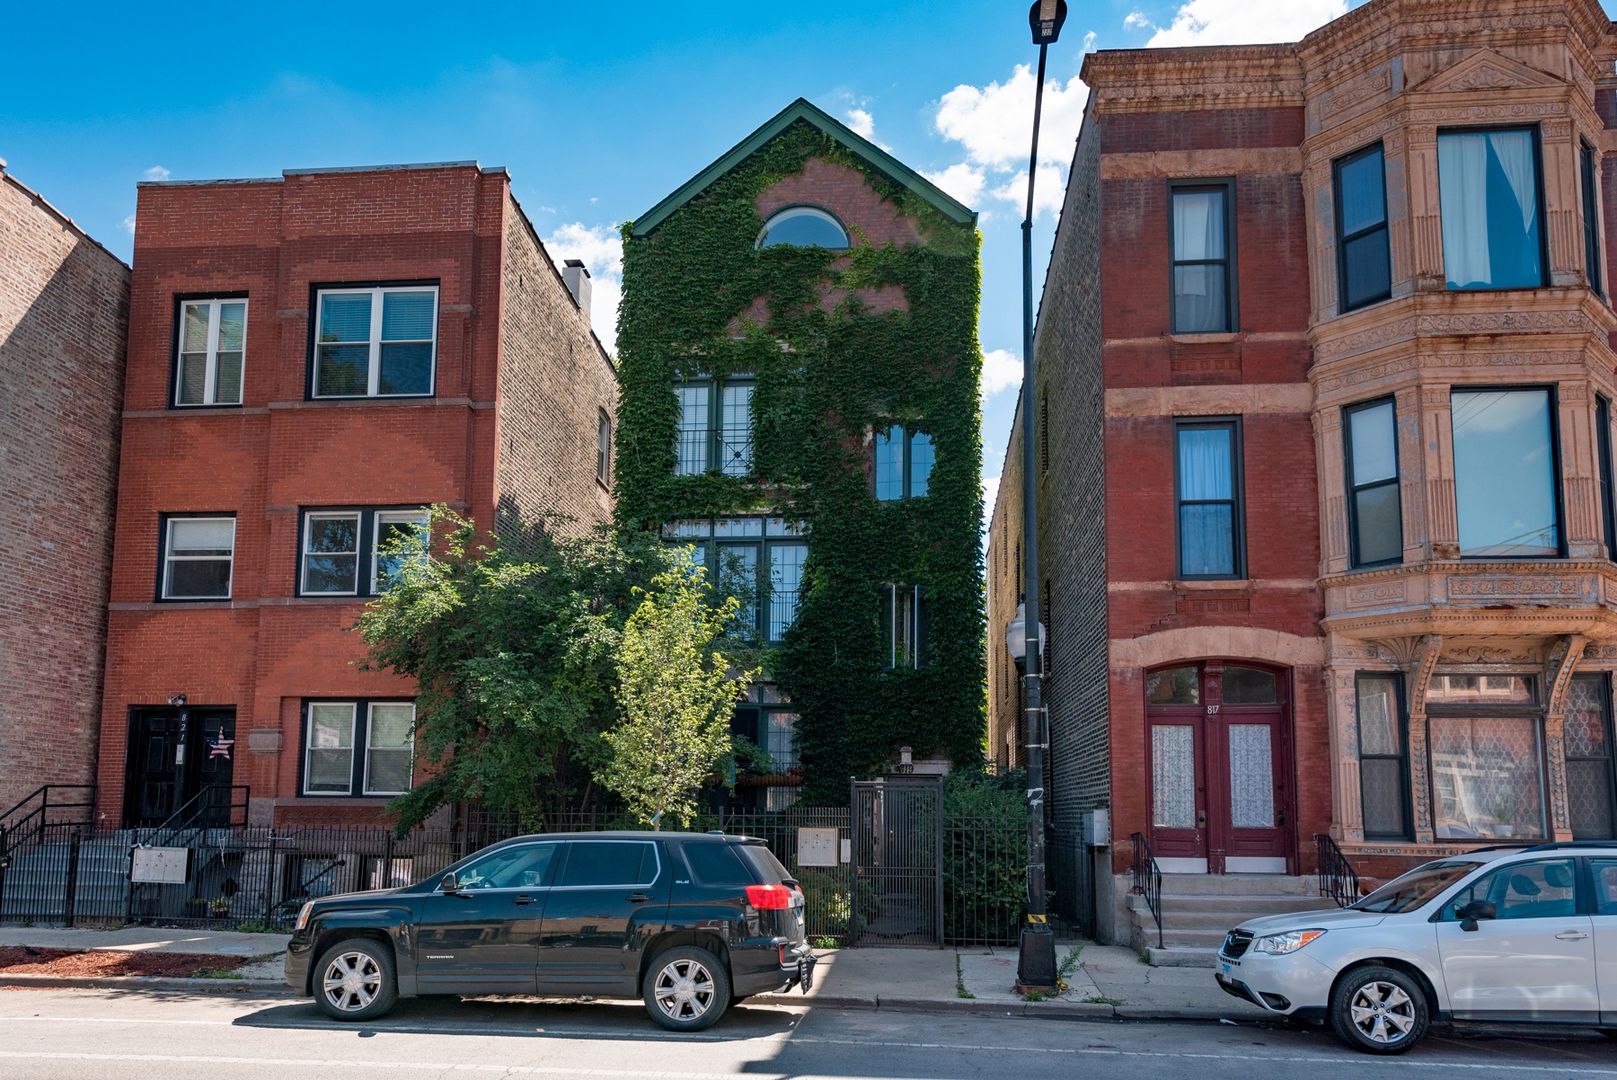 Main Photo: 819 N Damen Avenue Unit 2 in Chicago: CHI - West Town Residential Lease for sale ()  : MLS®# 11454038